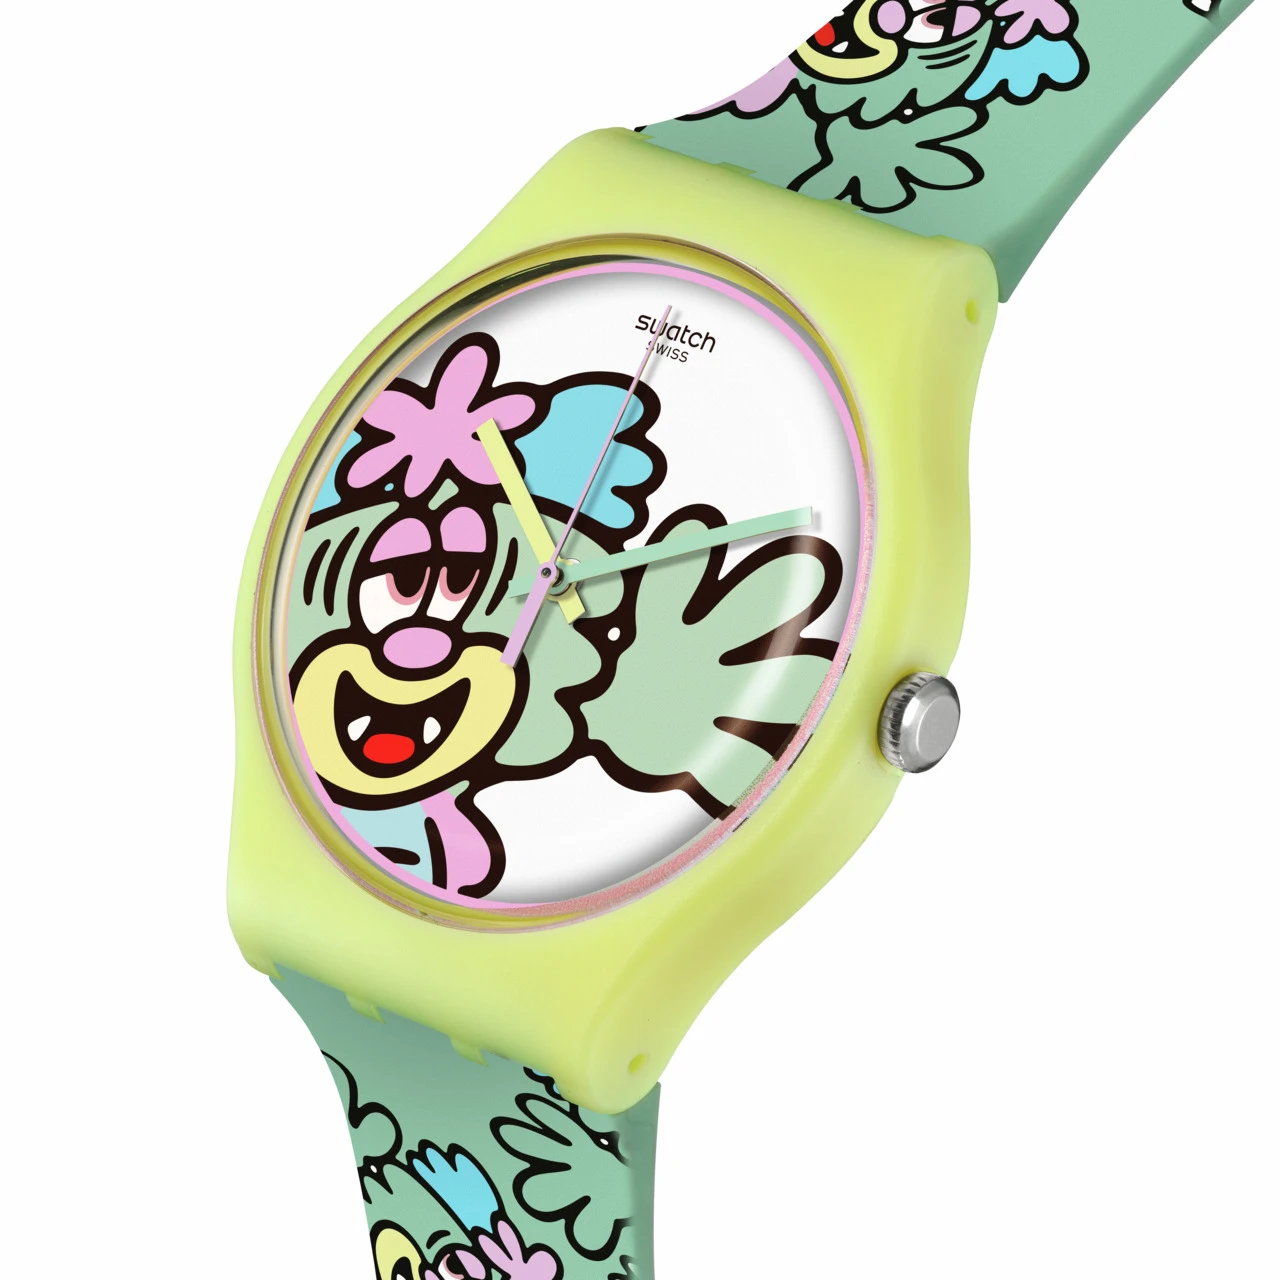 A vibrant swatch watch featuring a cartoon face with a pink flower on its head, displayed on a lime green strap adorned with colorful floral patterns.